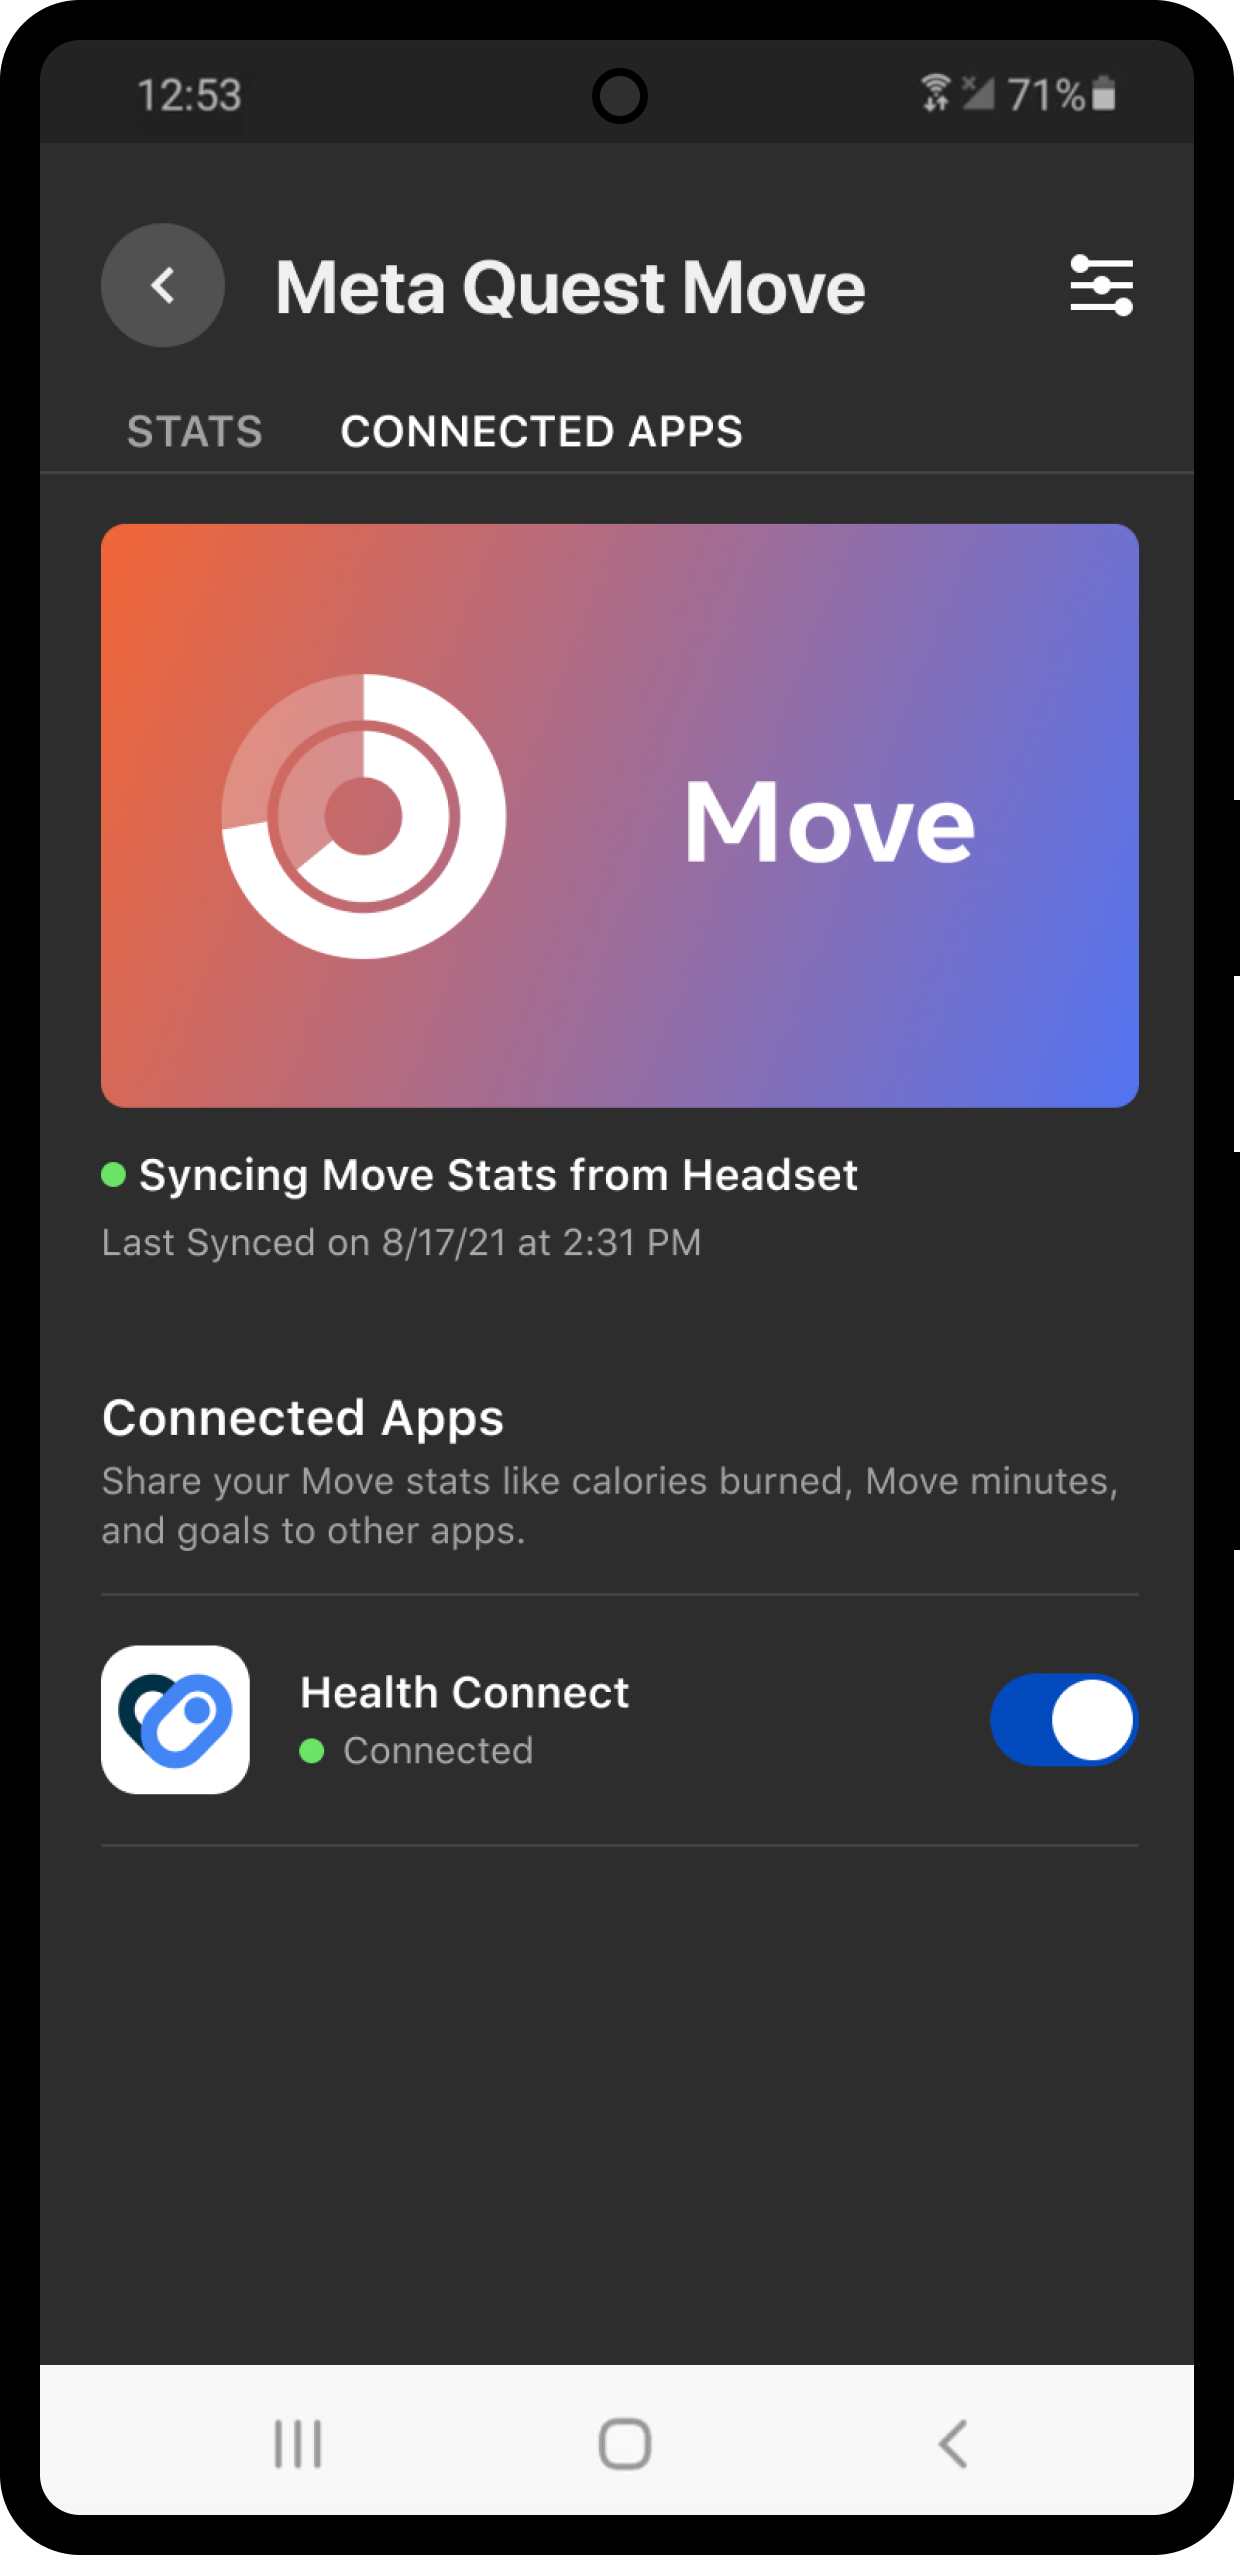 Meta Quest Move adds support for Health Connect syncing on Android